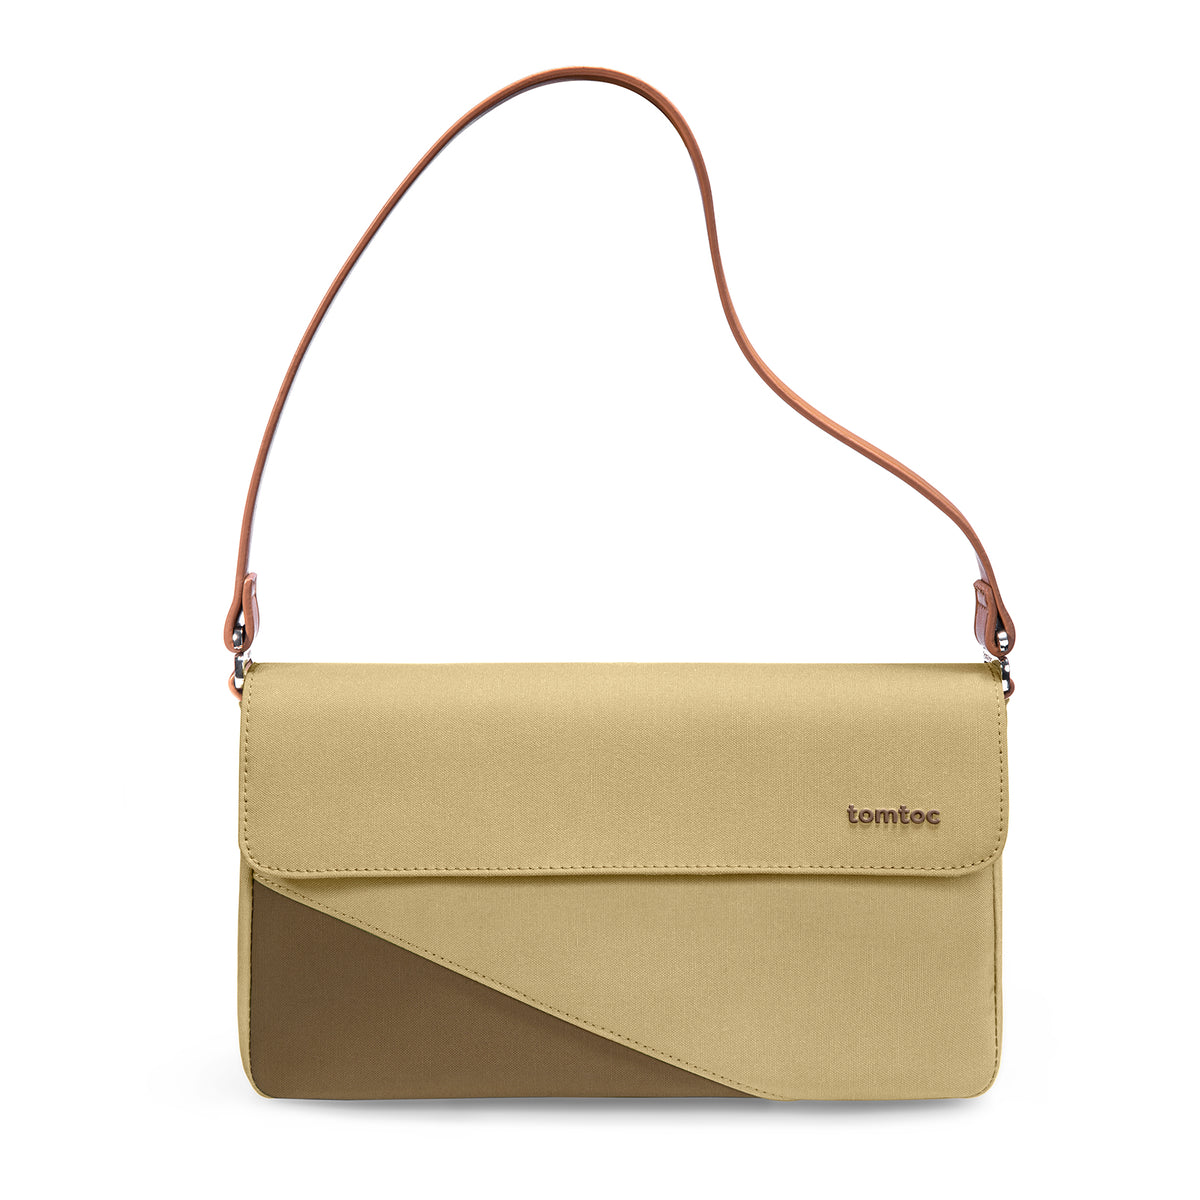 primary_The Her-A0203 Switch Daily Bag